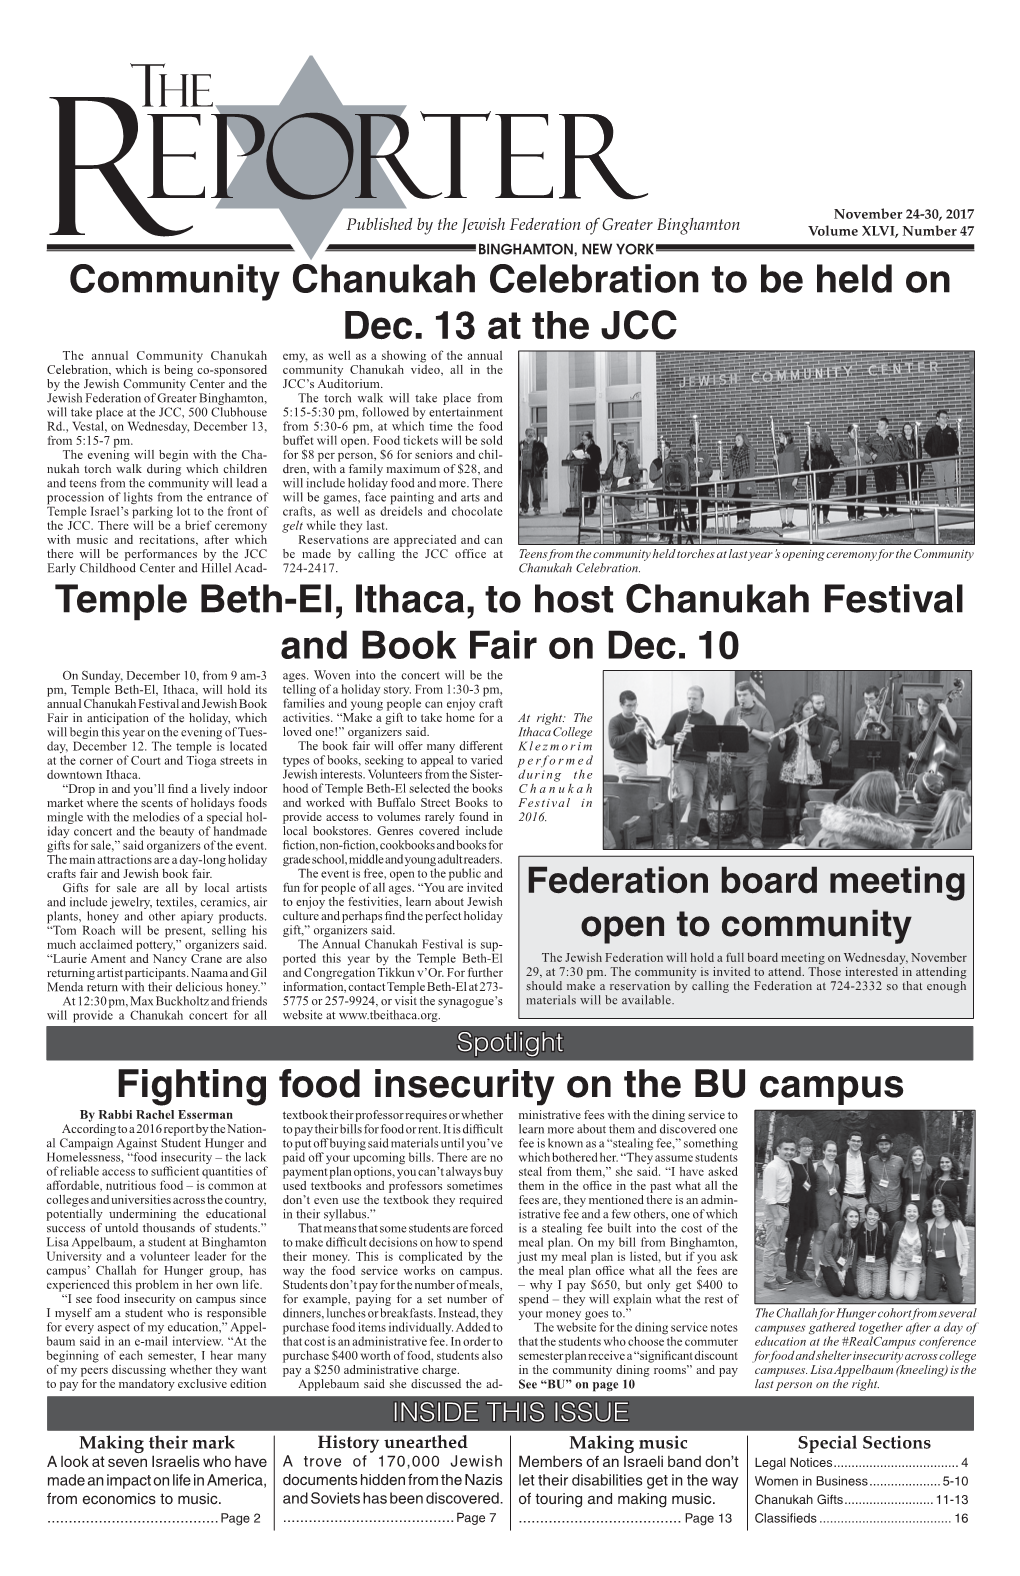 Fighting Food Insecurity on the BU Campus Community Chanukah